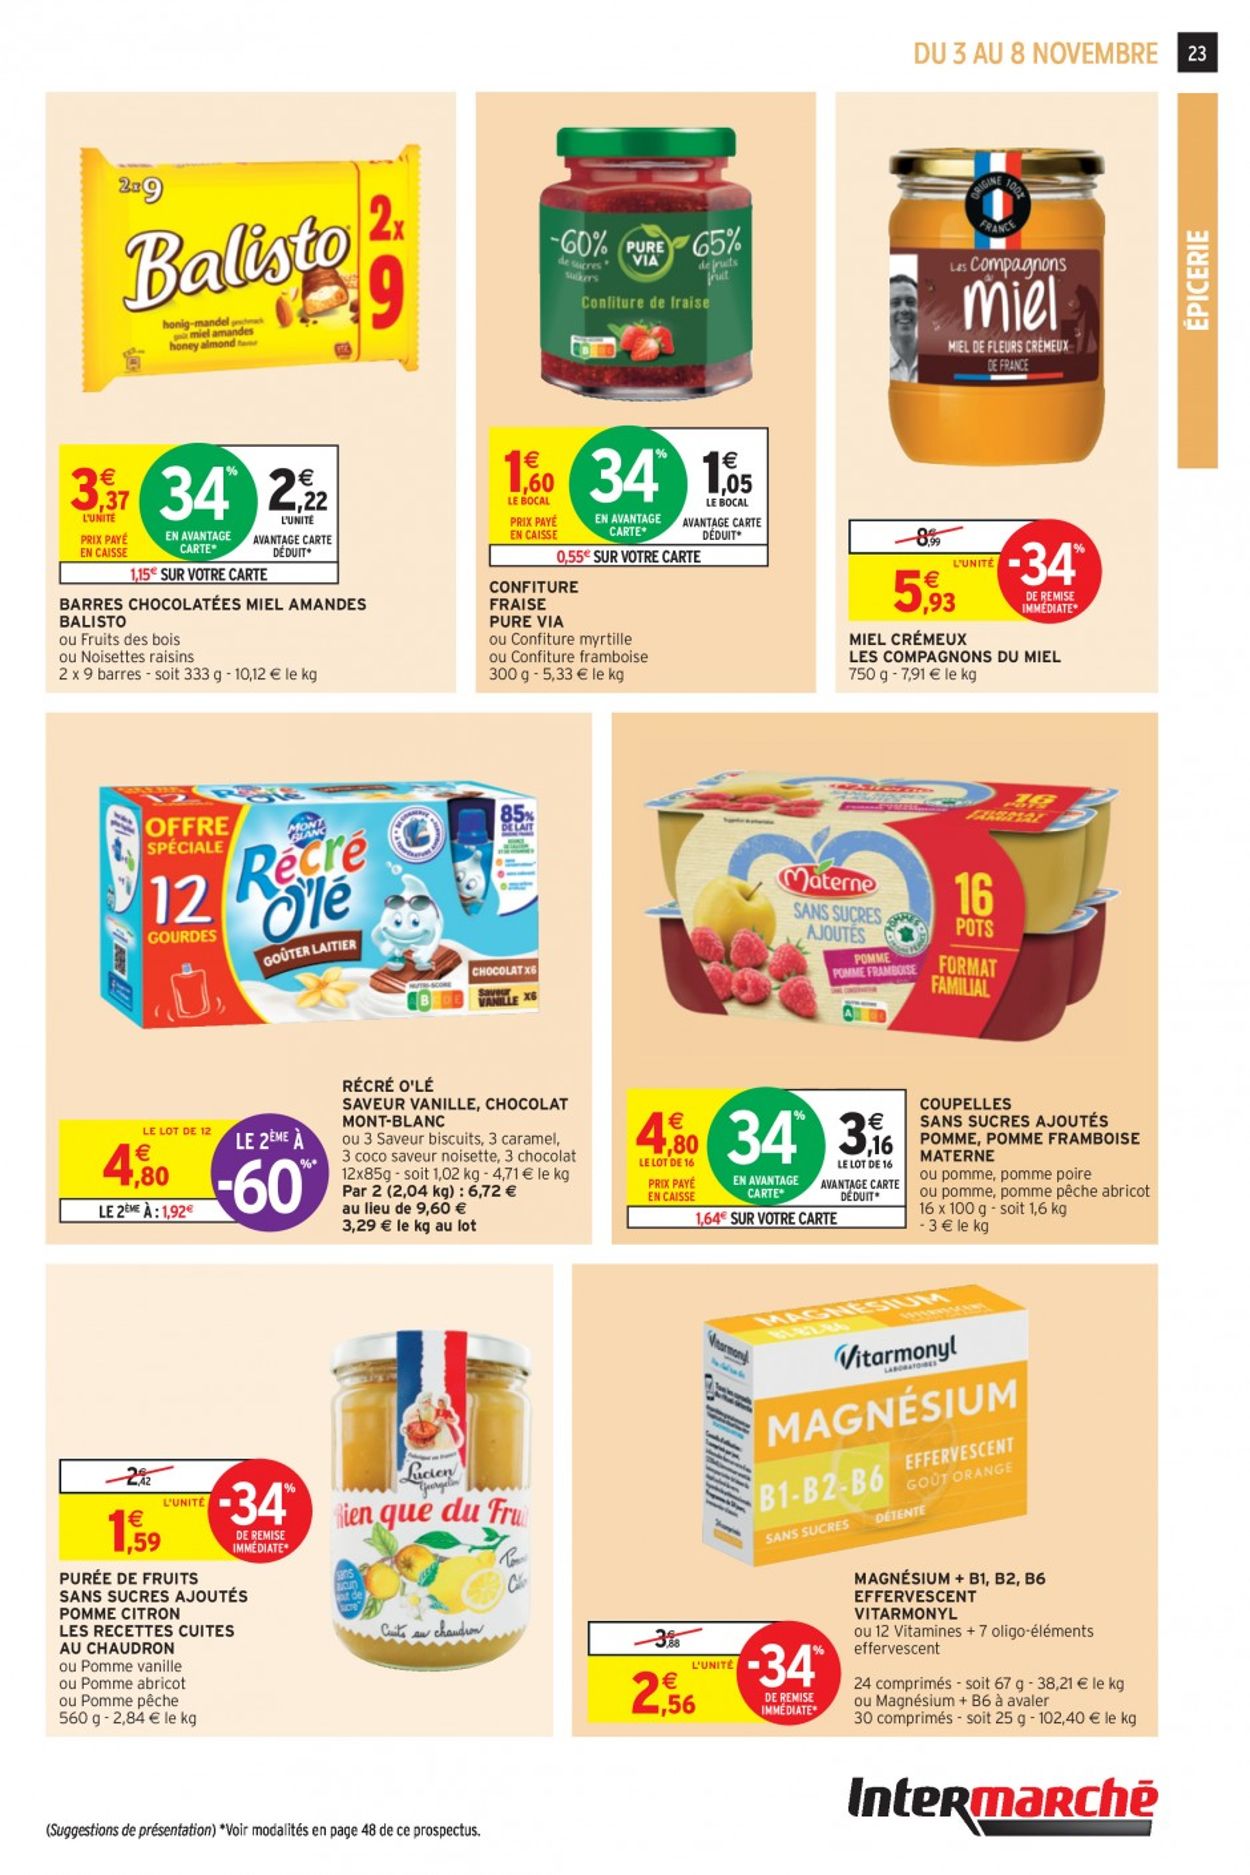 Intermarché Black Friday 2020 Catalogue - 03.11-08.11.2020 (Page 23)